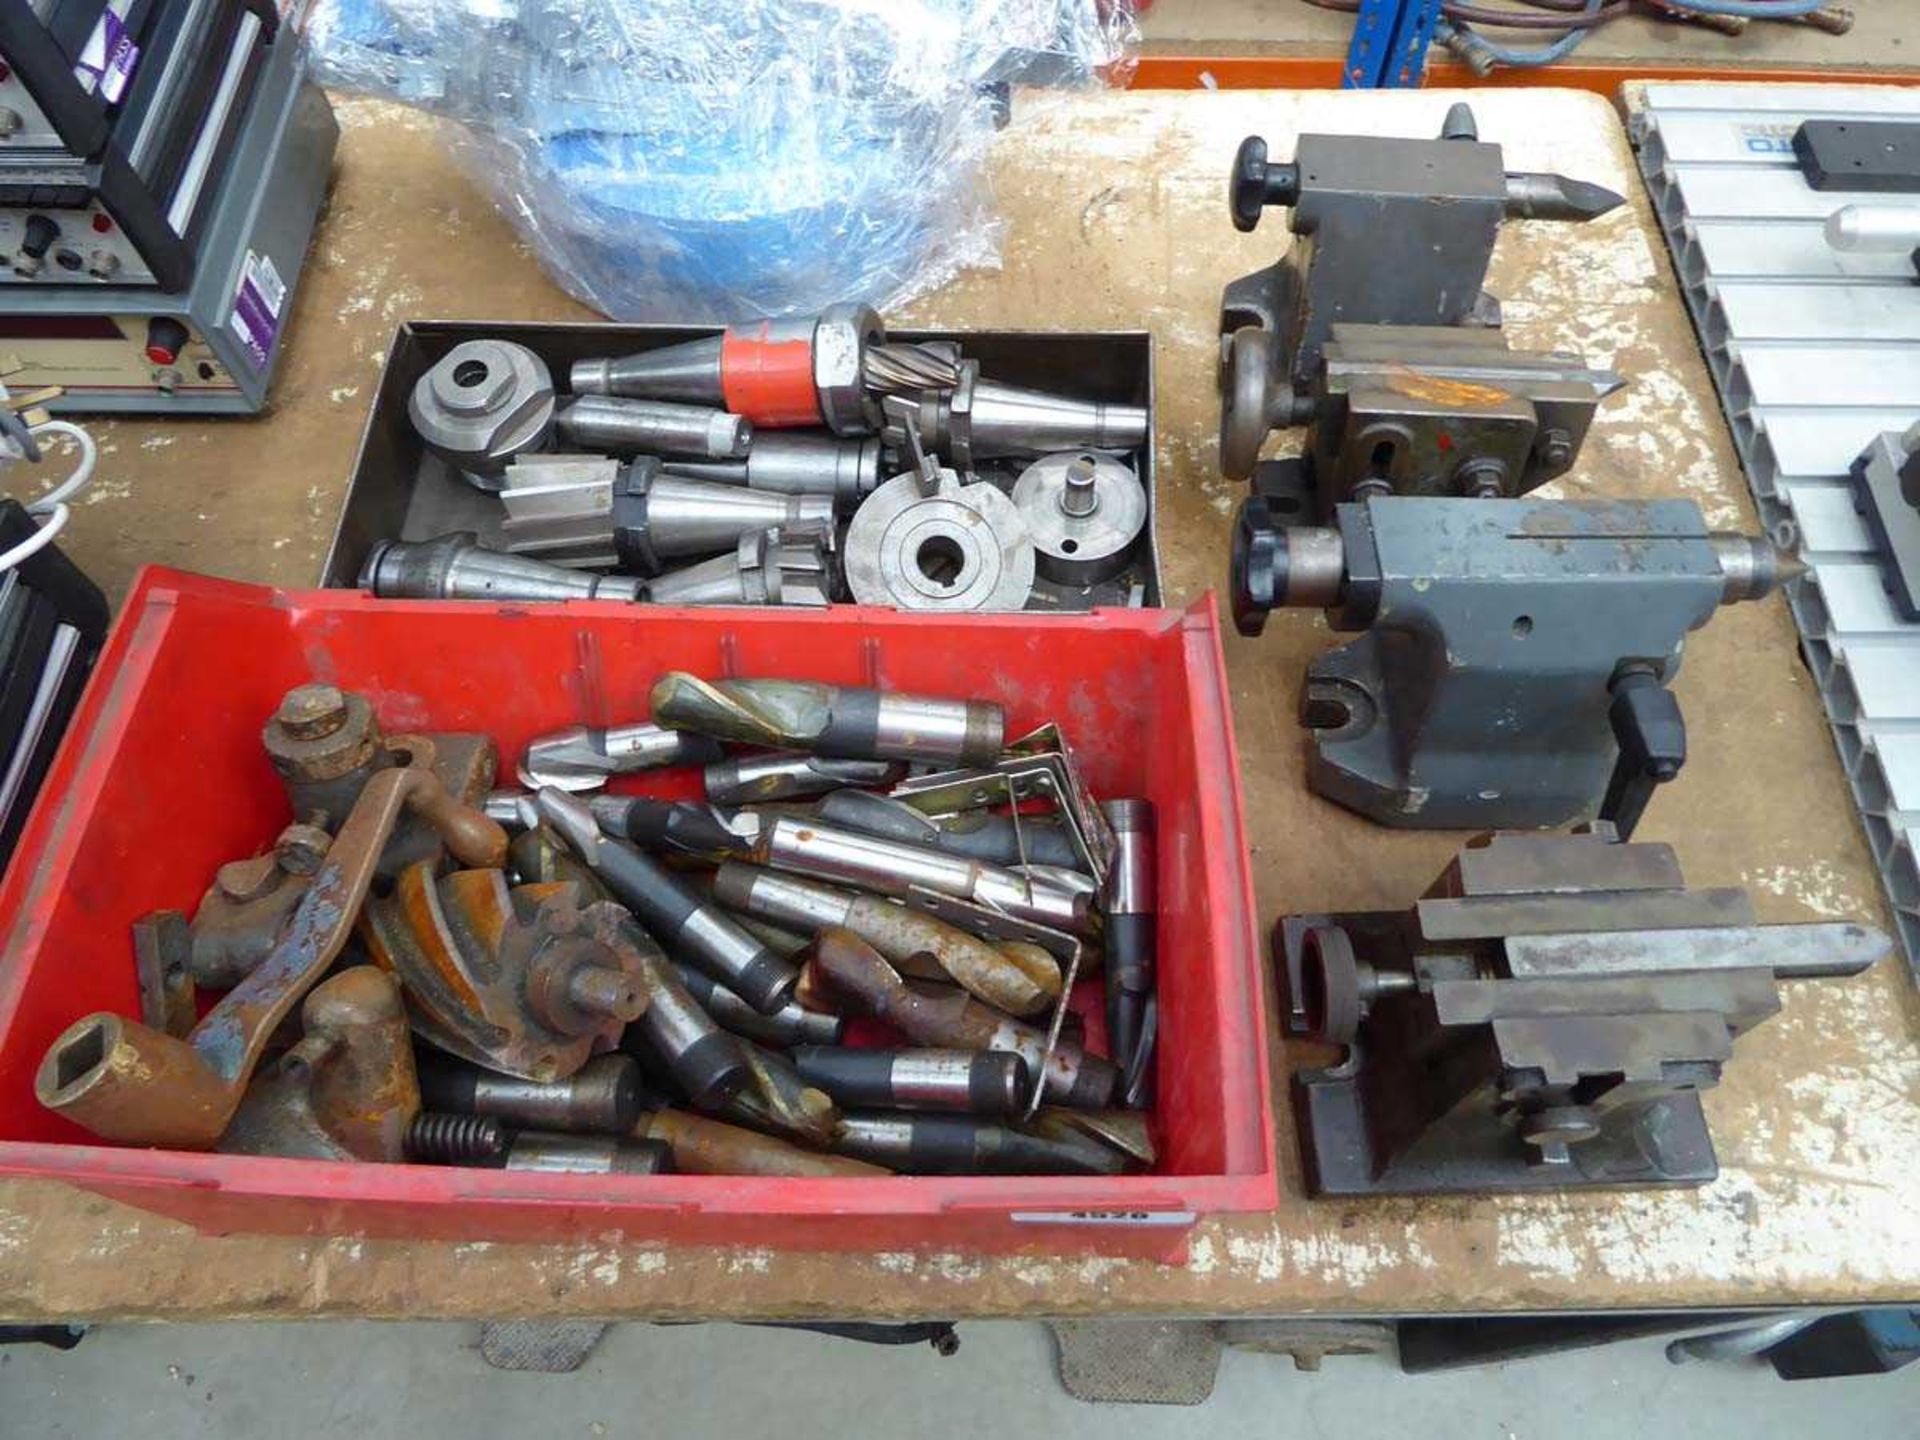 +VAT 4 lathe machine tail stocks and 2 trays of various large drill bits, reamers, and machine